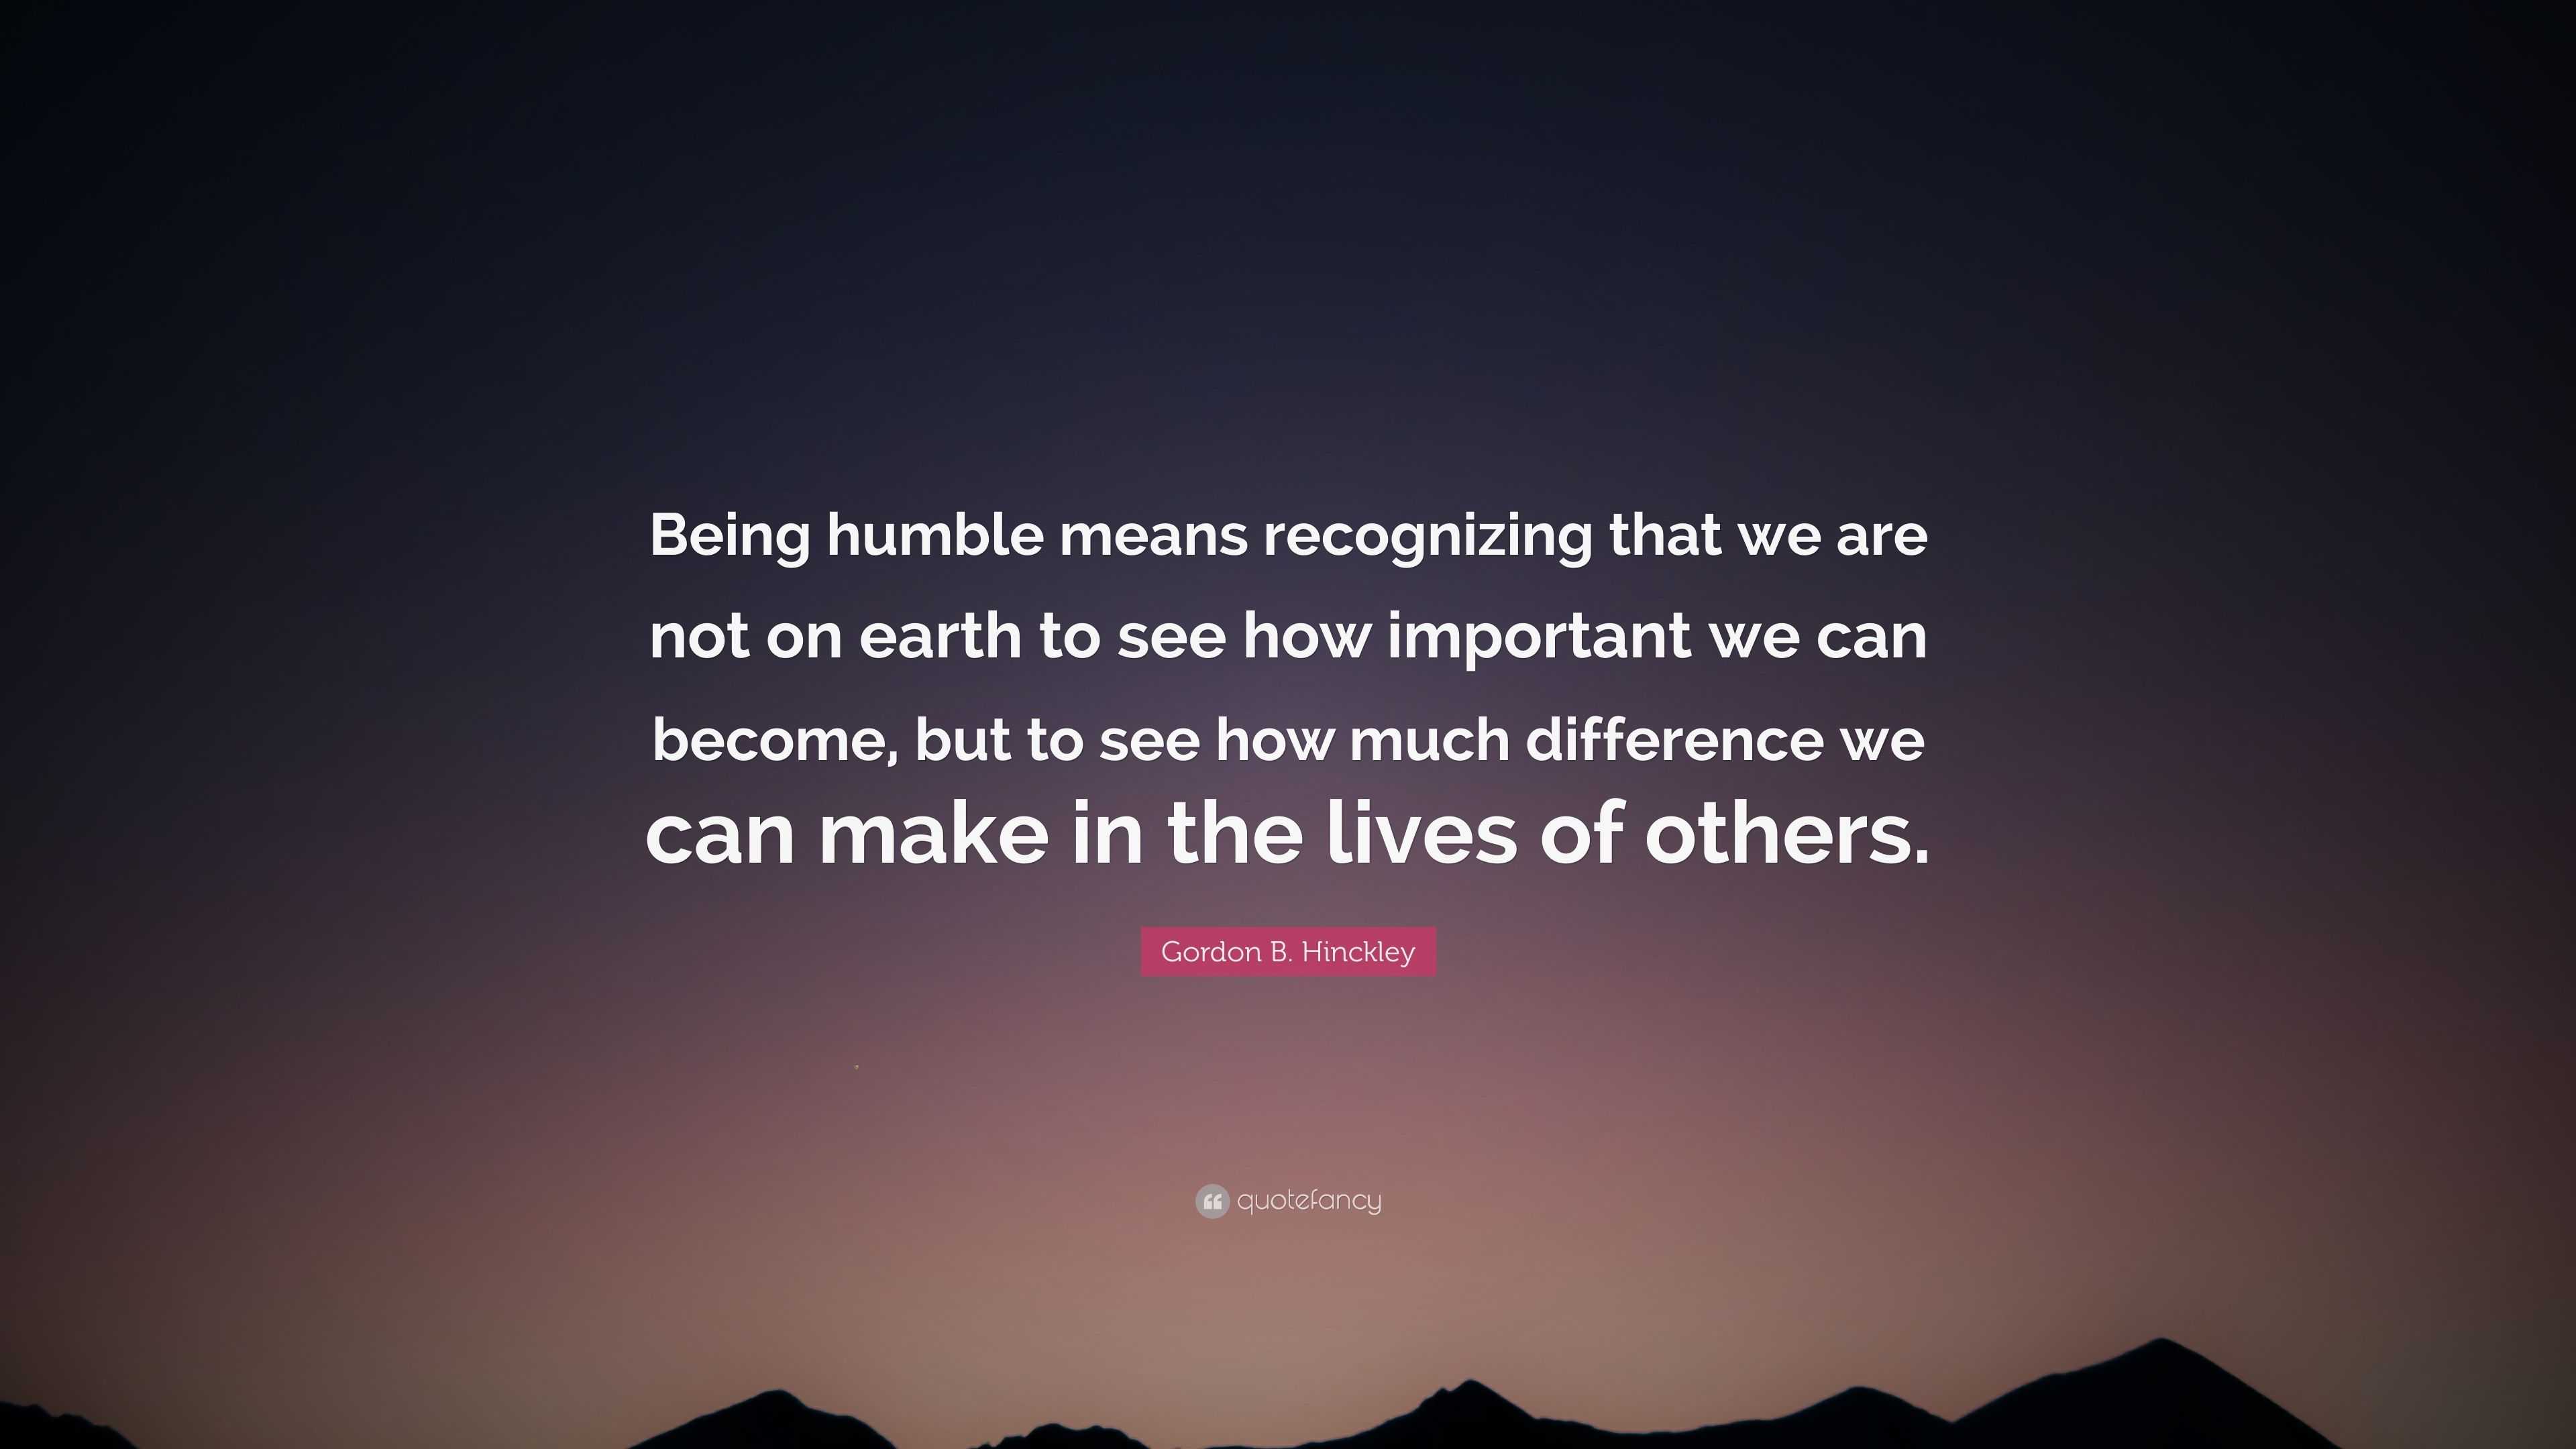 Gordon B. Hinckley Quote: “Being humble means recognizing that we are